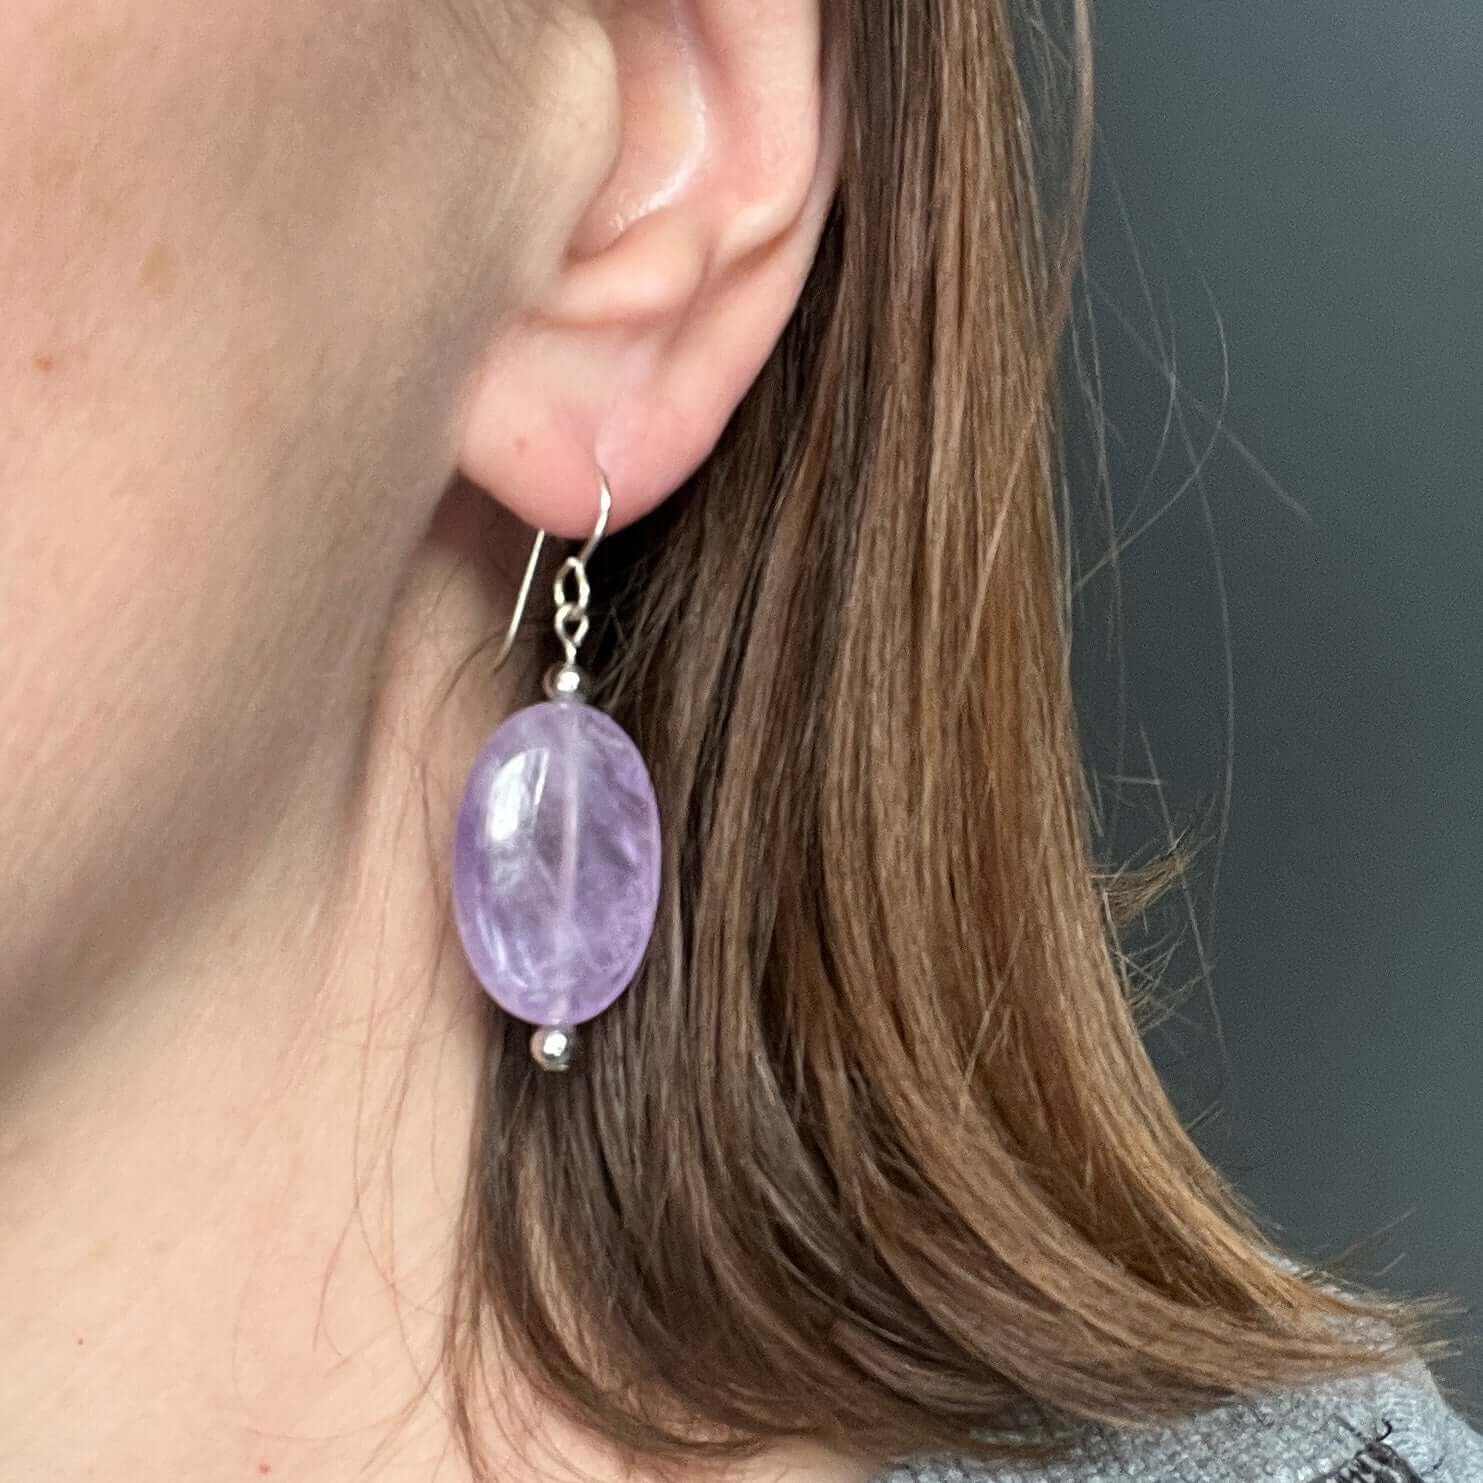 Lavender Amethyst Earrings These earrings are made with high-quality Amethyst stones which bring serenity to the wearer. Amethyst is a stone of serenity. This stone helps to calm the mind. It was once known as a “Gem of Fire” by ancient cultures. It has b